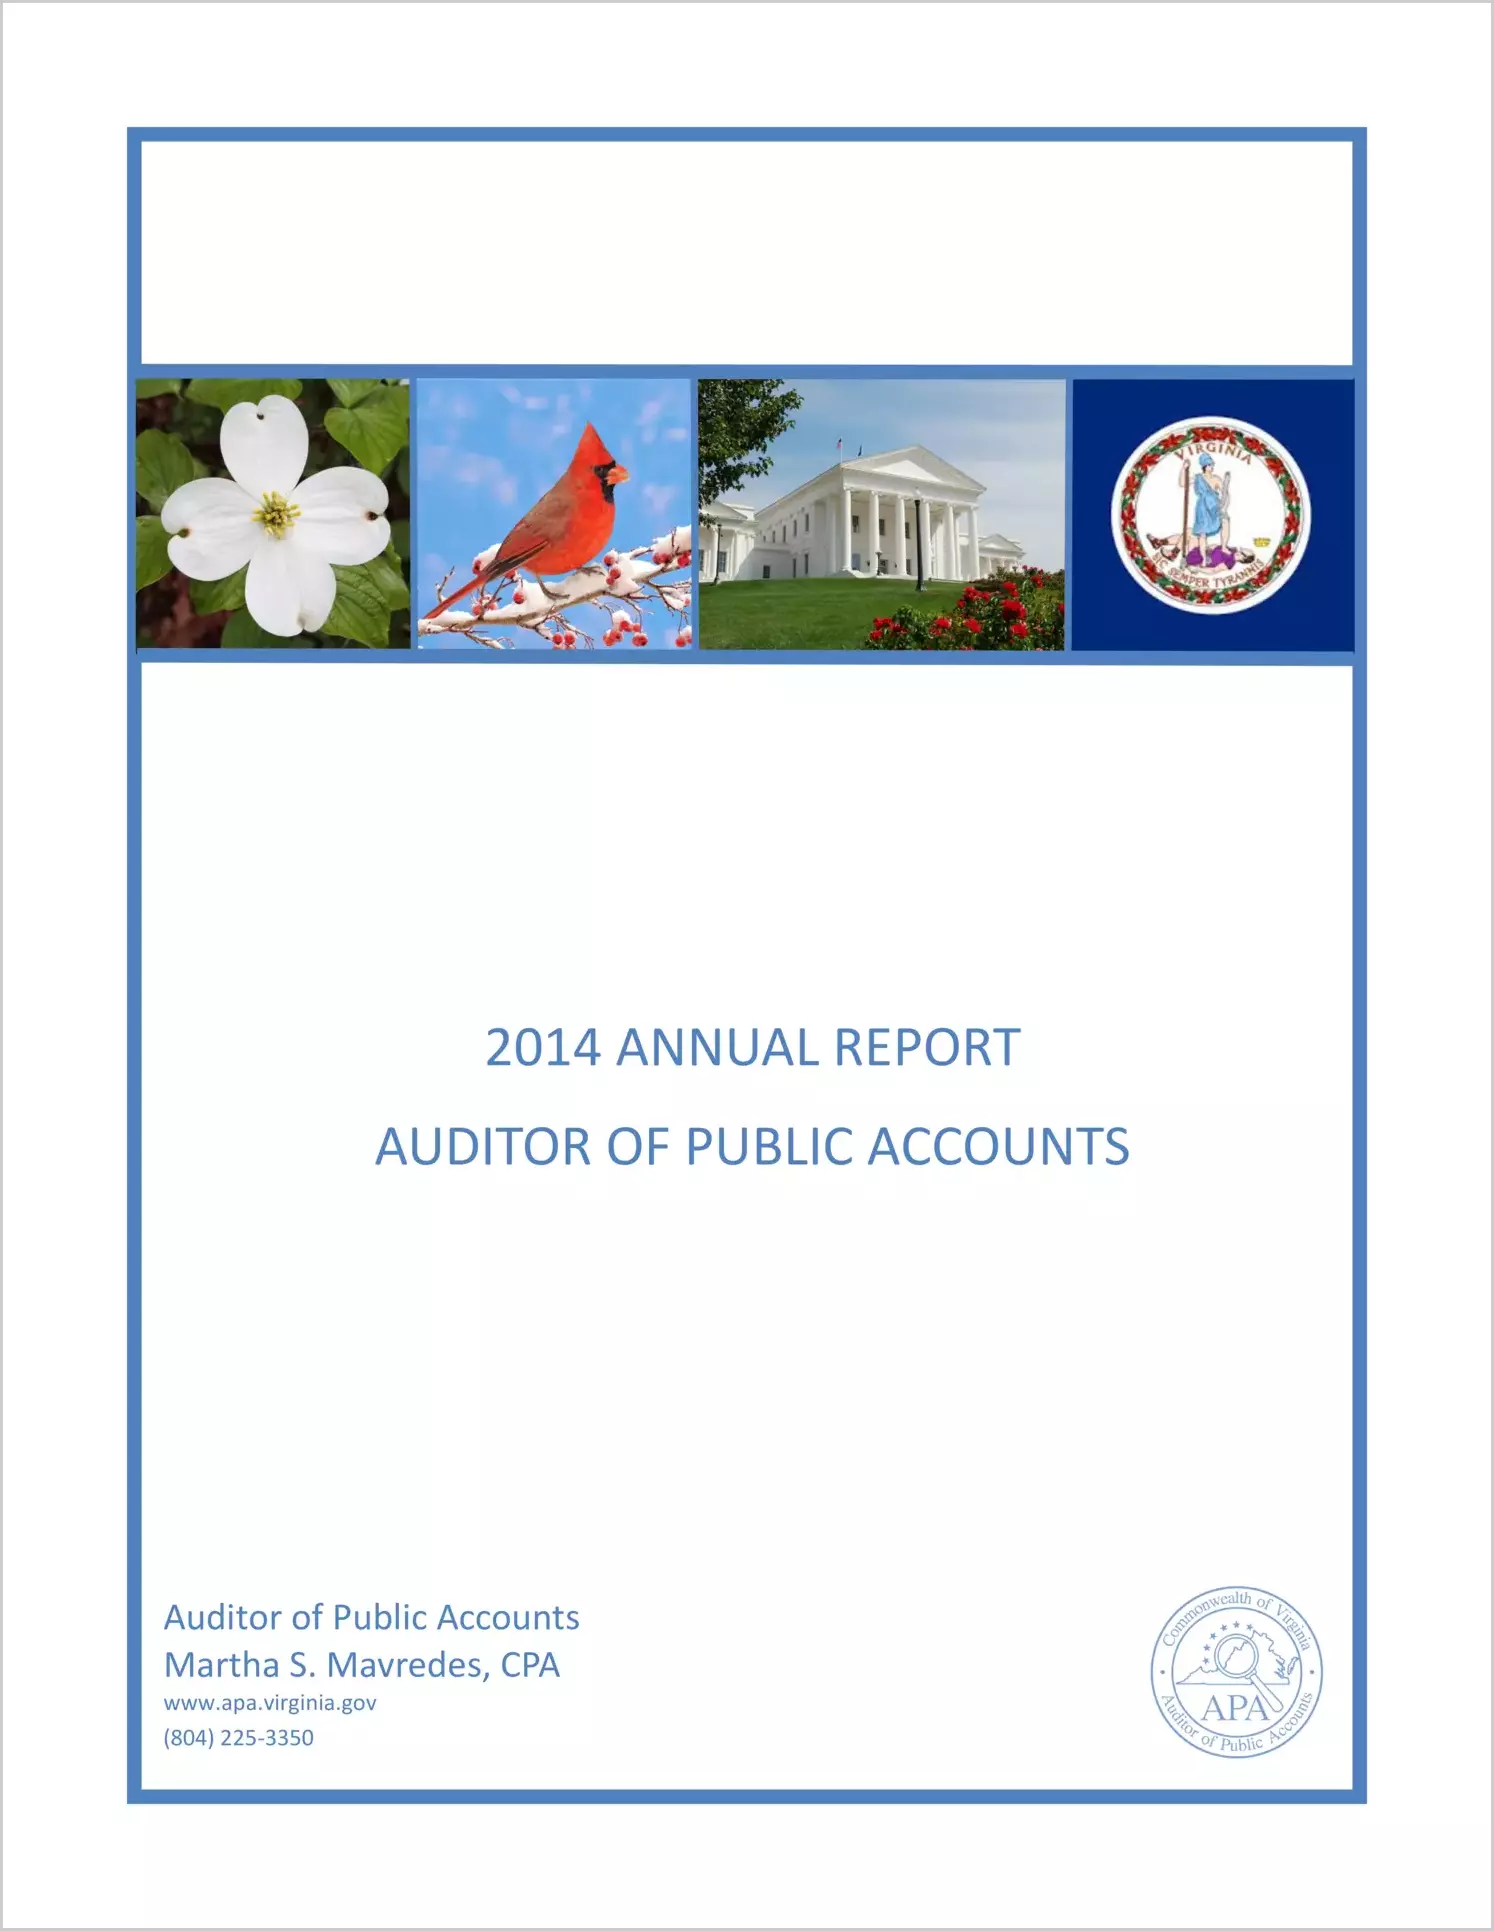 2014 Annual Report Auditor of Public Accounts